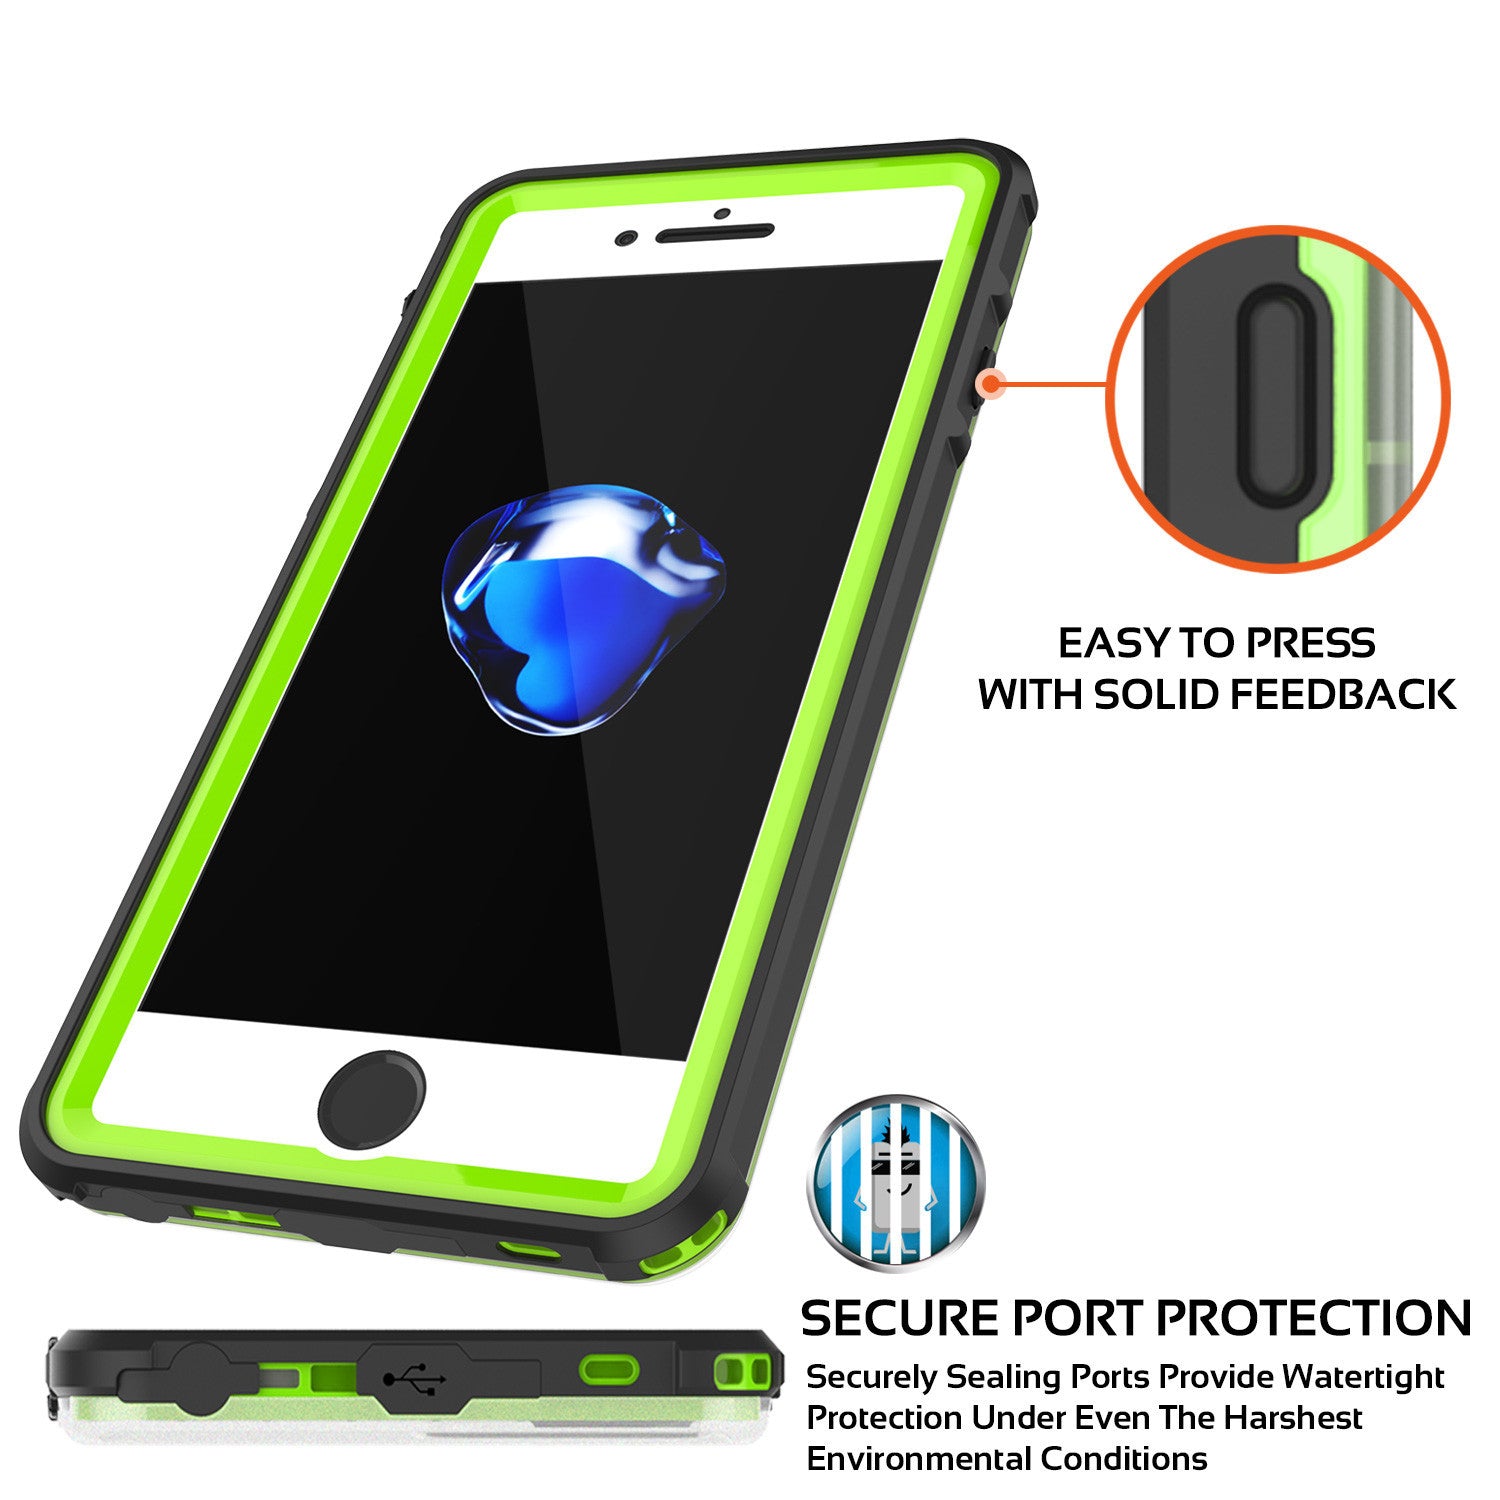 iPhone 7+ Plus Waterproof Case, PUNKcase CRYSTAL Light Green W/ Attached Screen Protector | Warranty